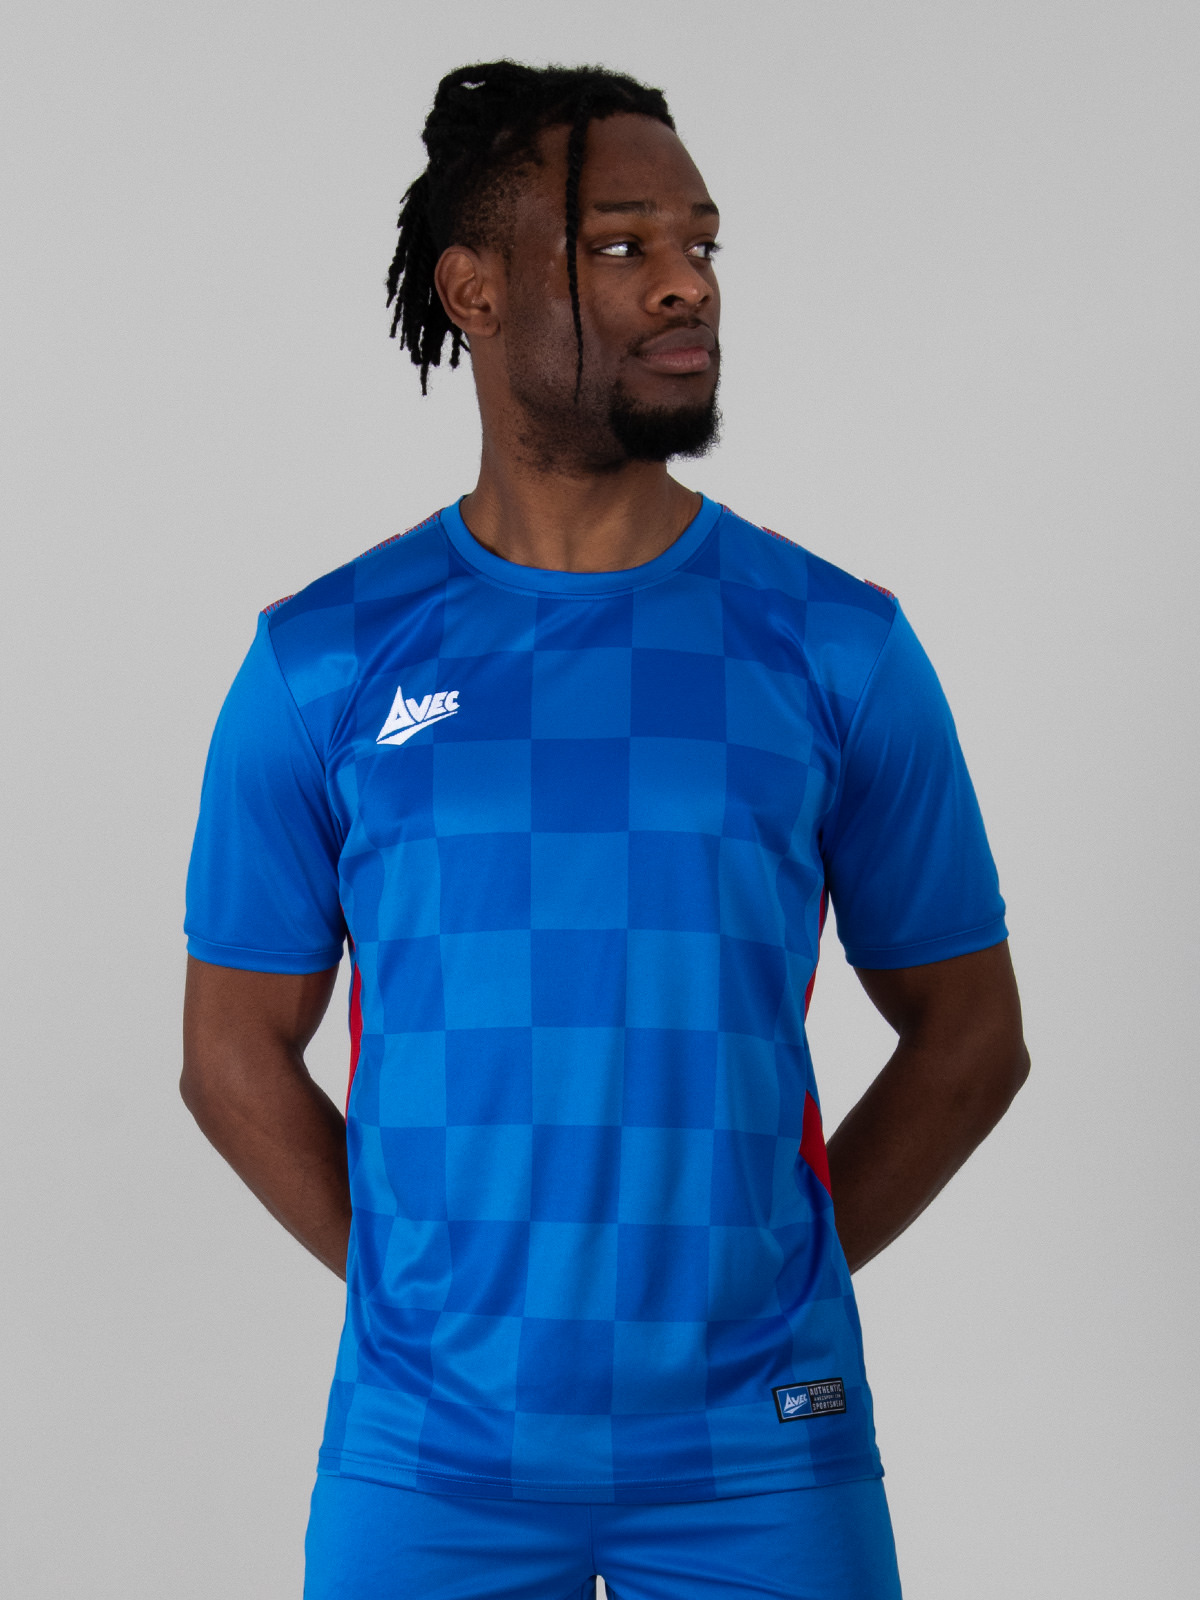 adult model is wearing a two-tone royal blue chequered football shirt with red side panels.